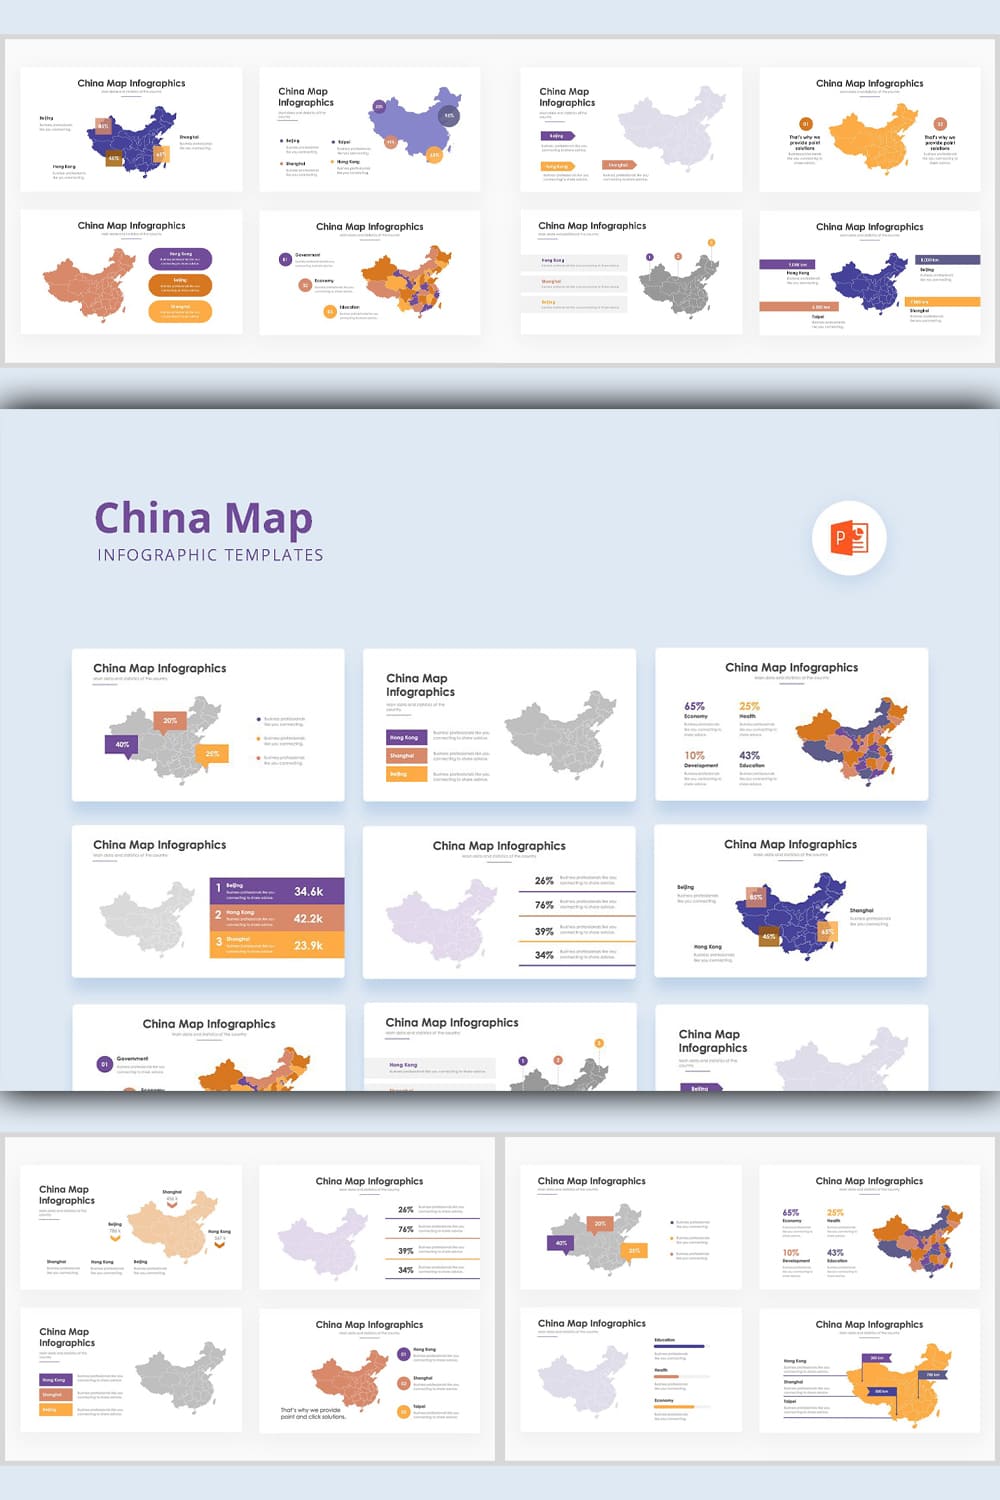 China Map Infographics - PowerPoint pinterest image.